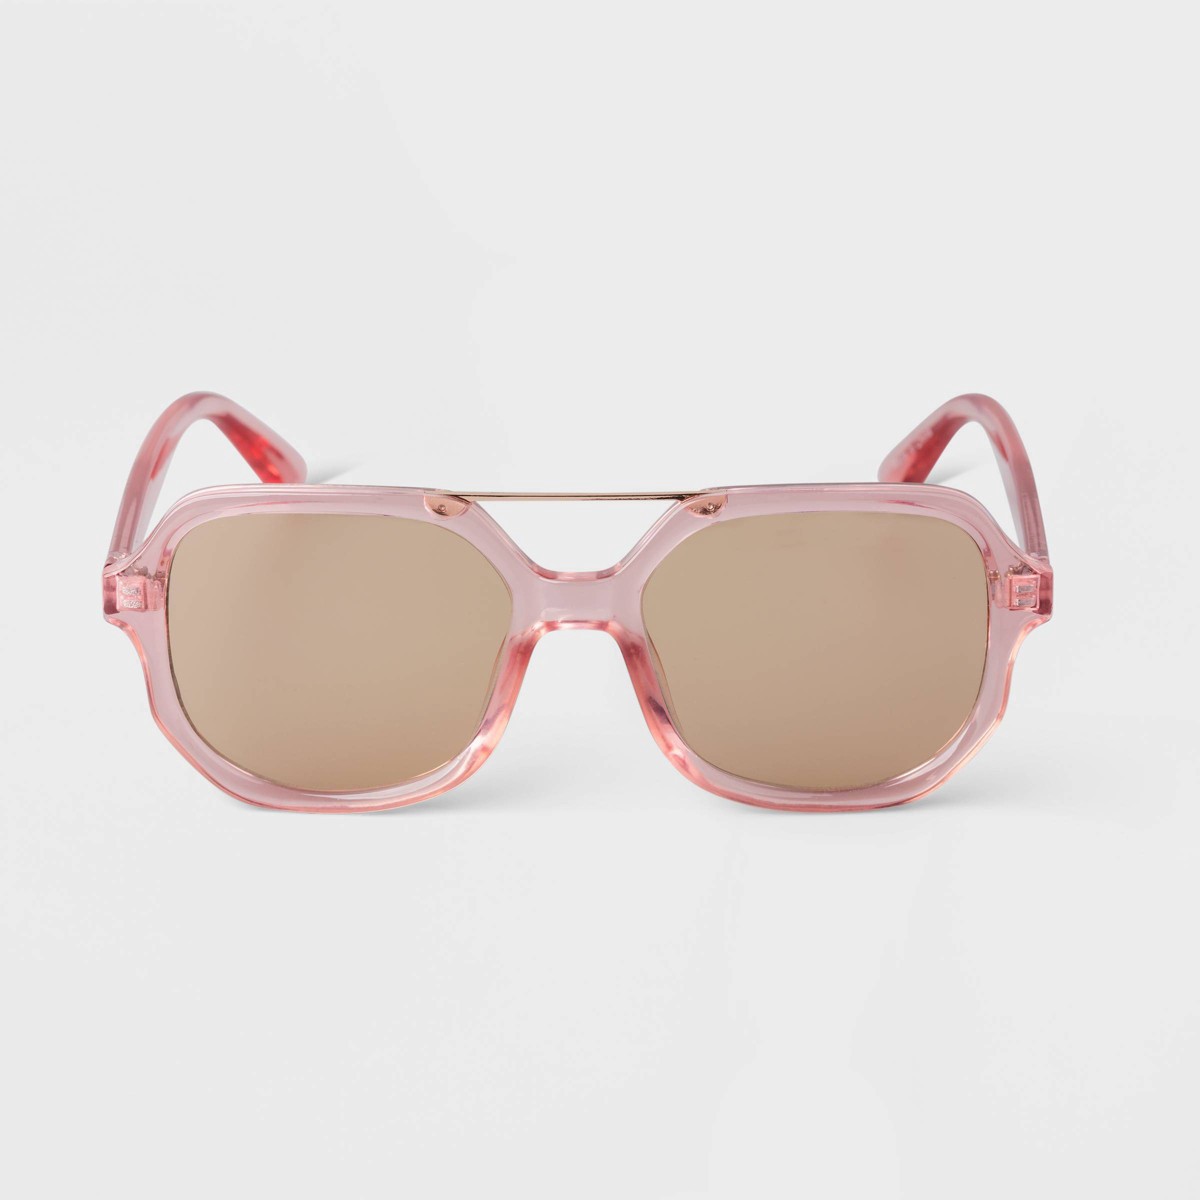 slide 1 of 2, Women's Square Crystal Aviator Sunglasses - A New Day Pink, 1 ct